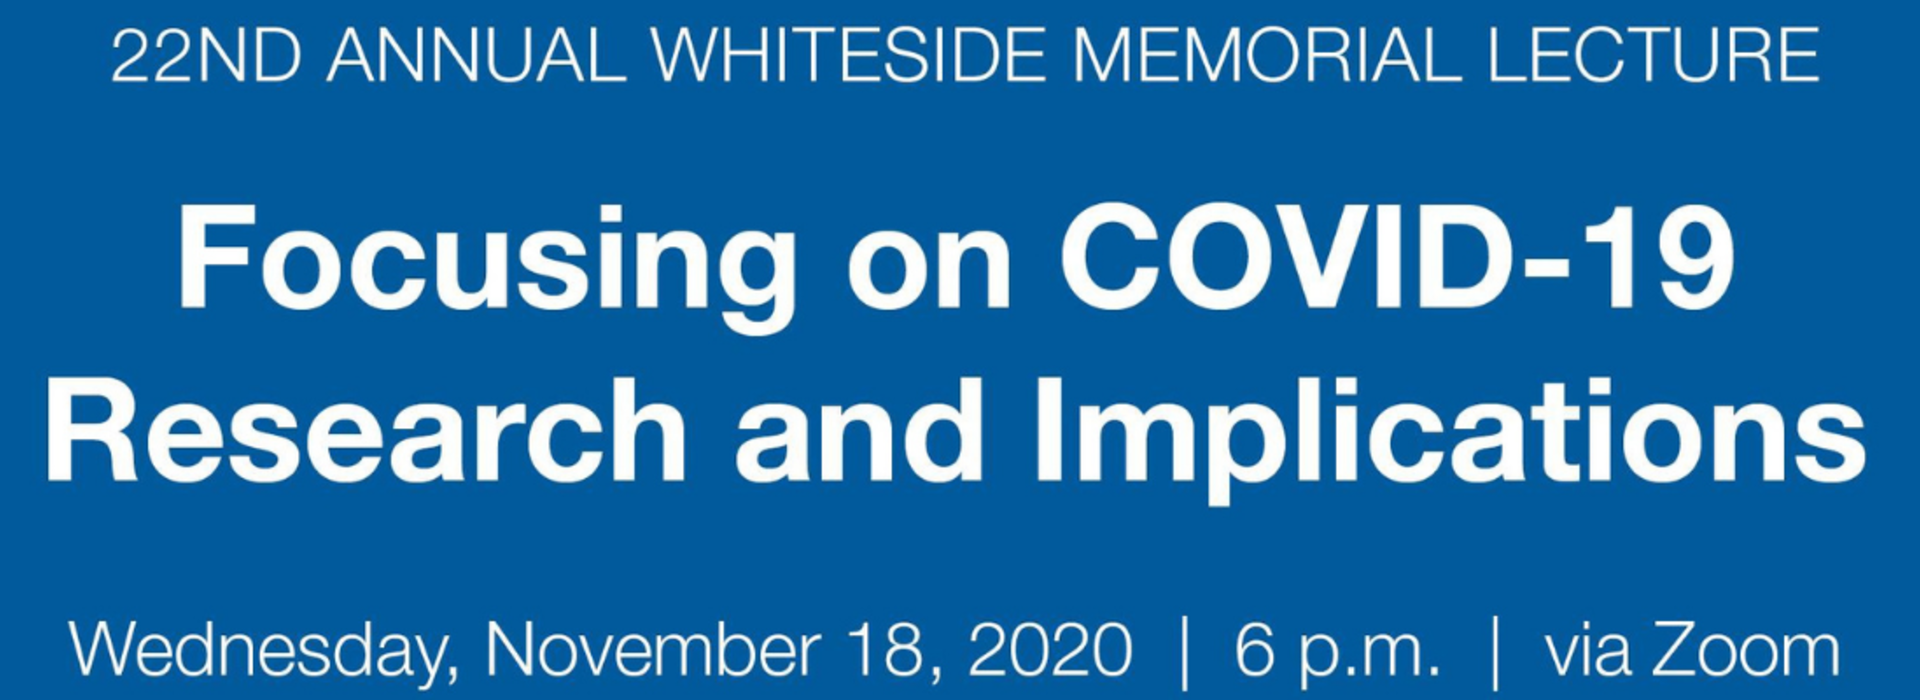 Annual Whiteside Memorial Lecture: Focusing on COVID-19 Research and Implications